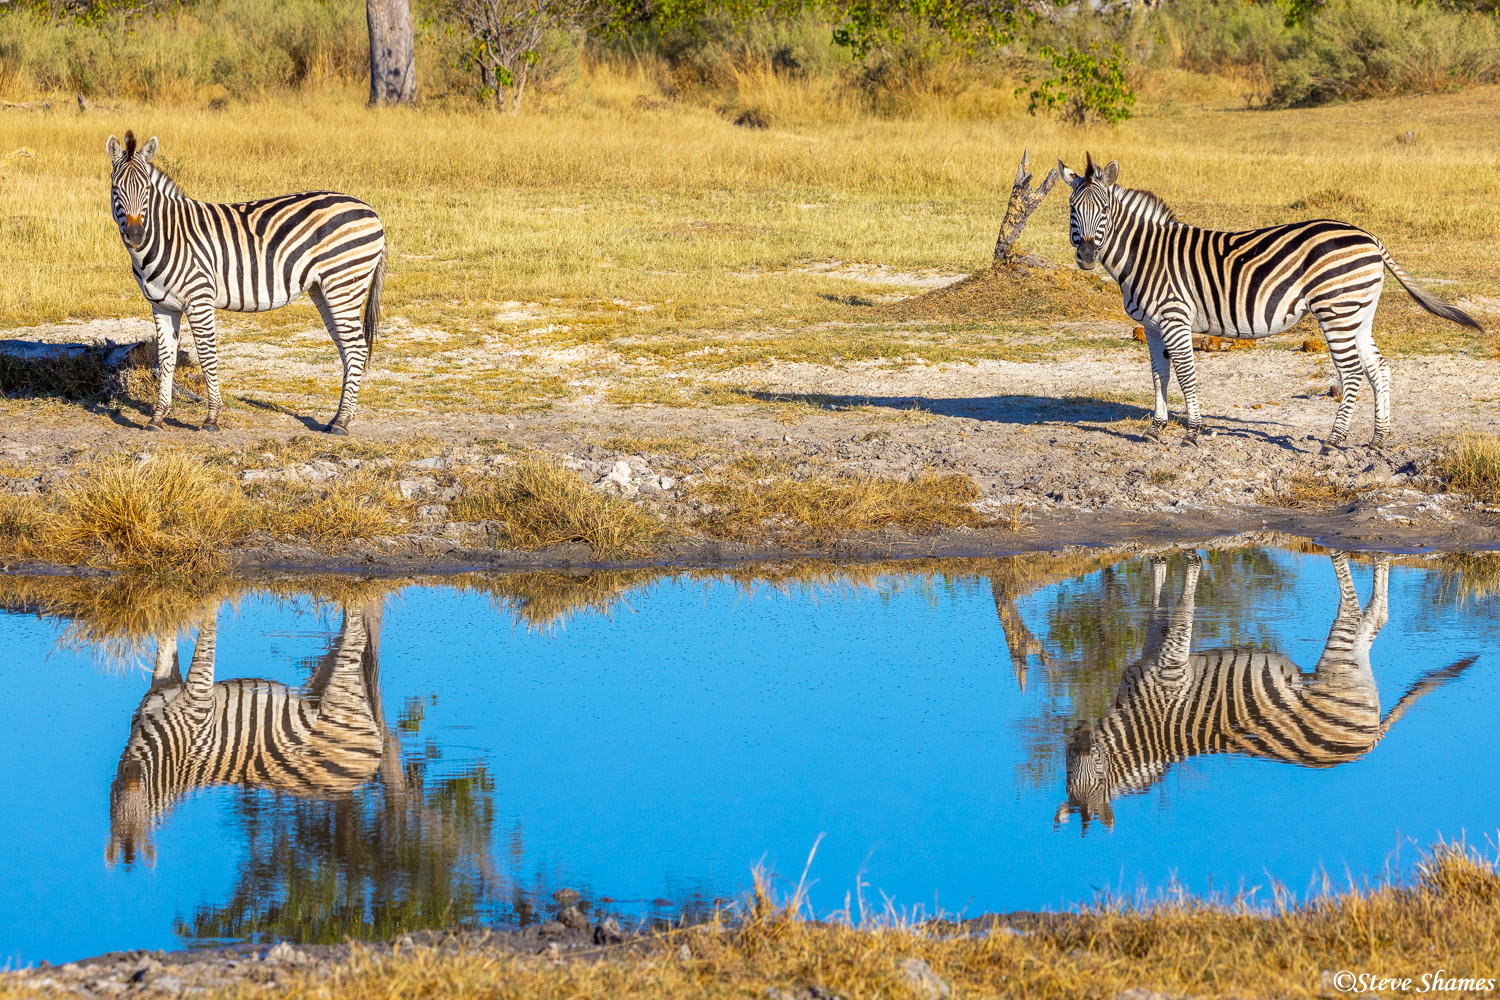 A great reflection here for these Okavango Delta zebras at Moremi Game Reserve.